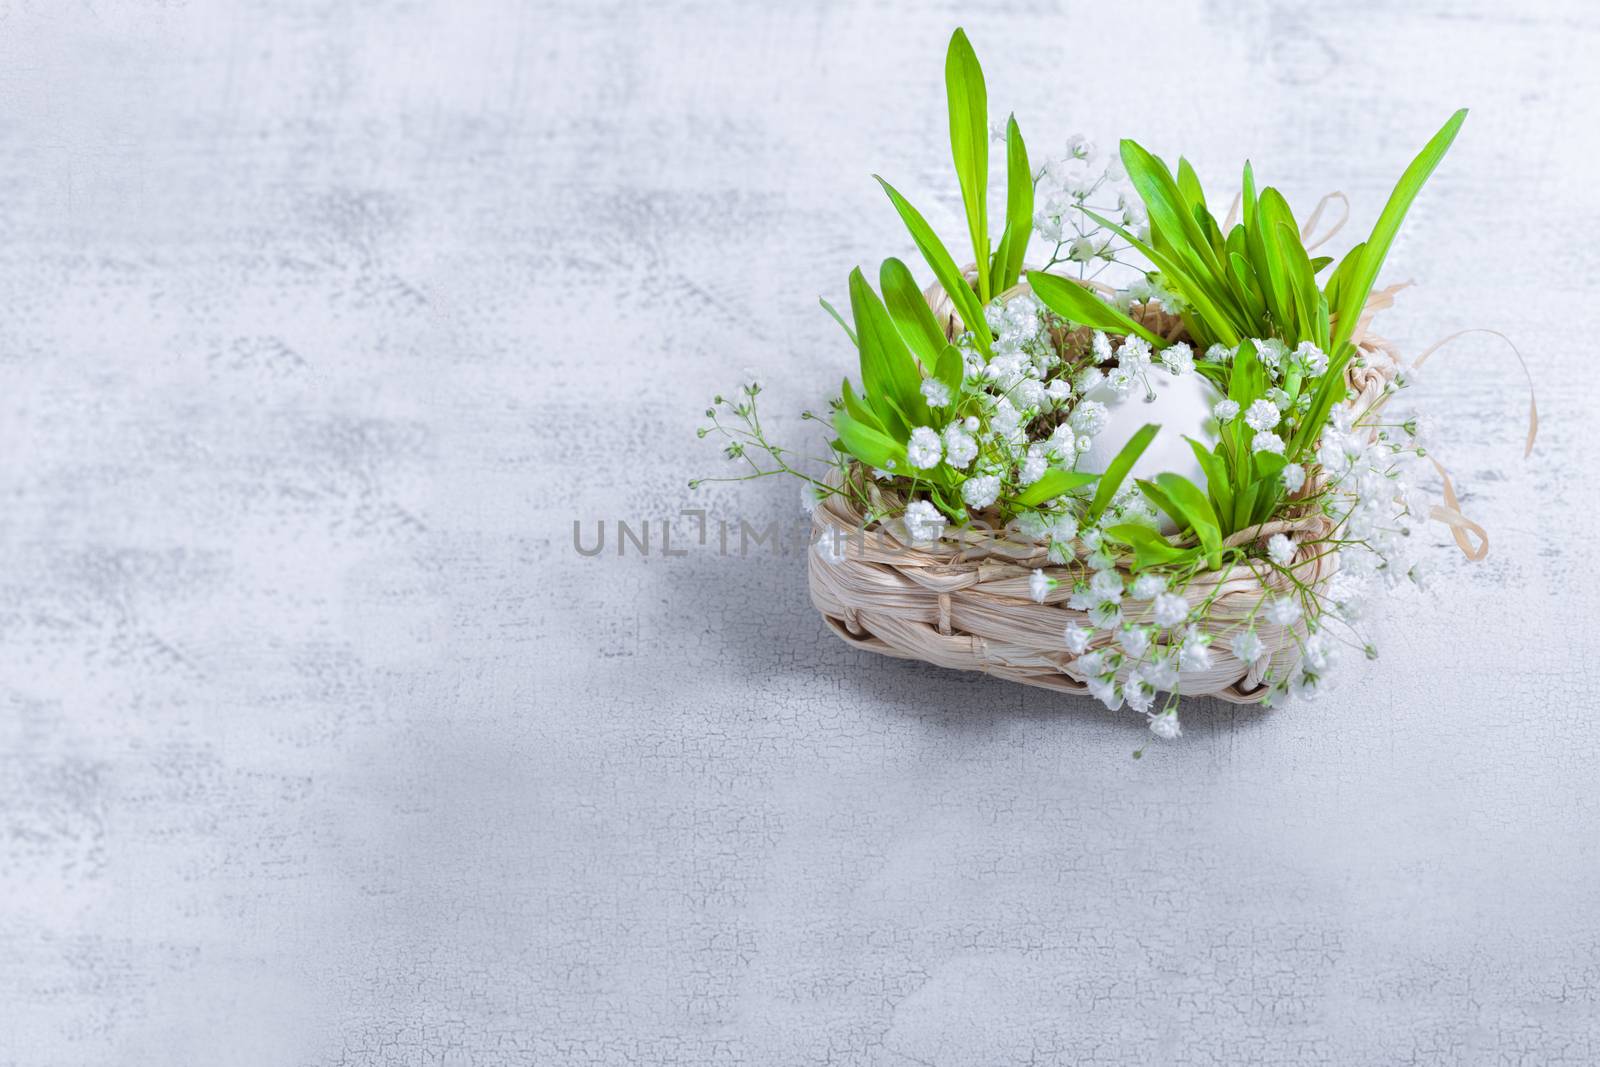 Easter symbols including flowers and egg on a white background